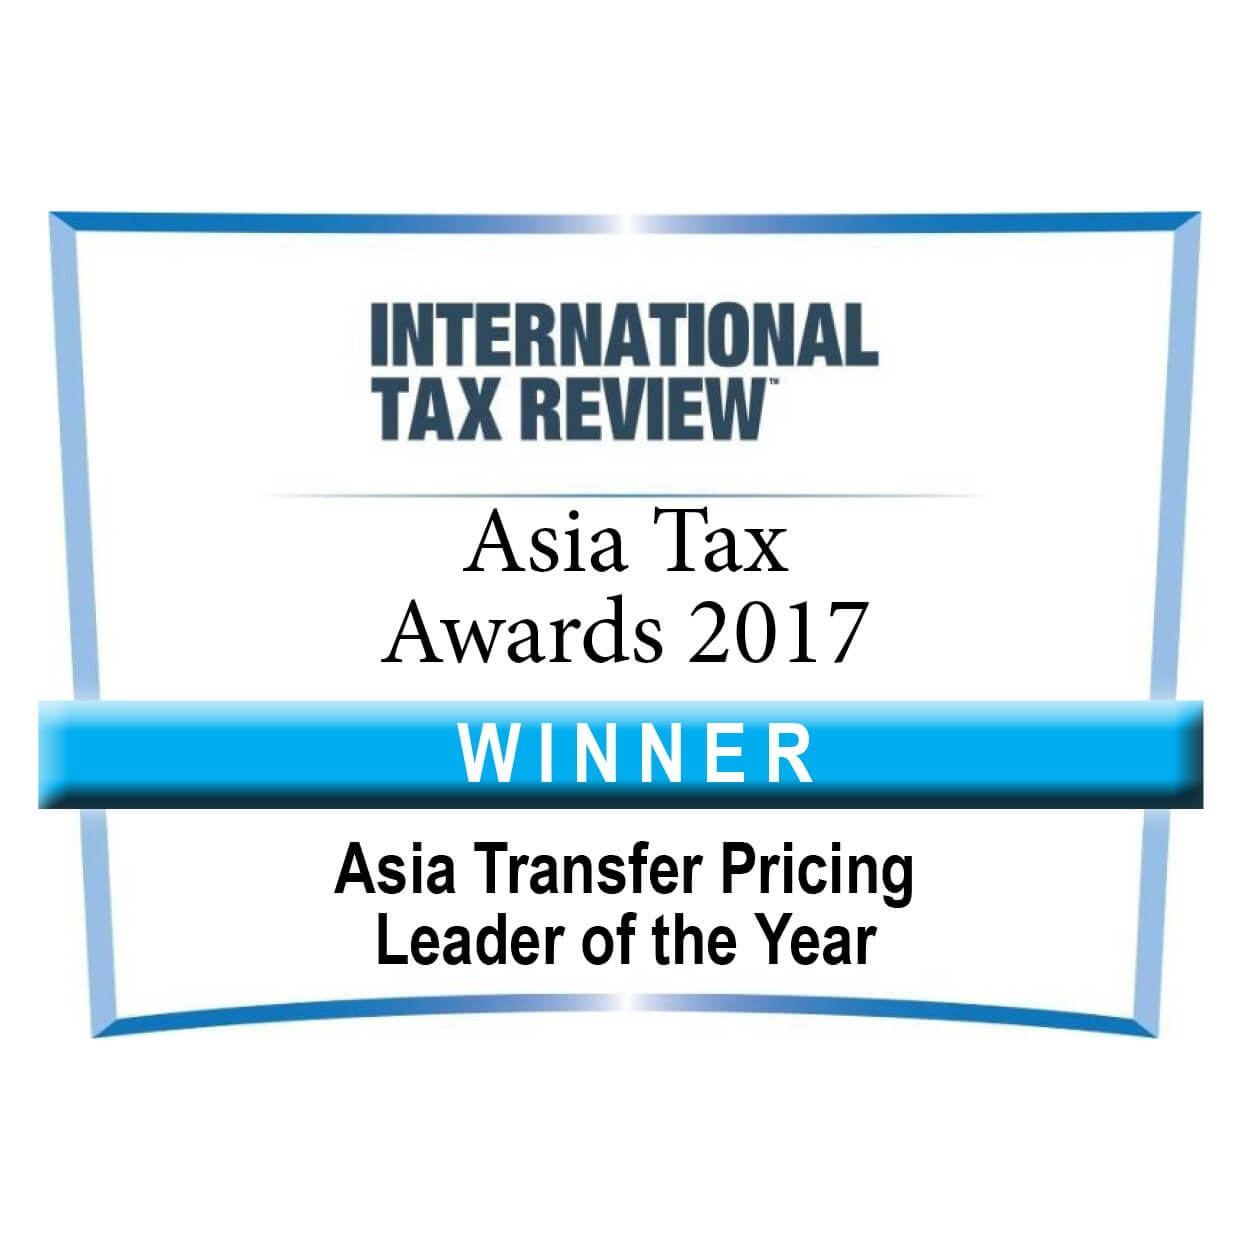 Asia TP Leader of the Year/Shannon Smit Asia Tax Awards Winner 2017